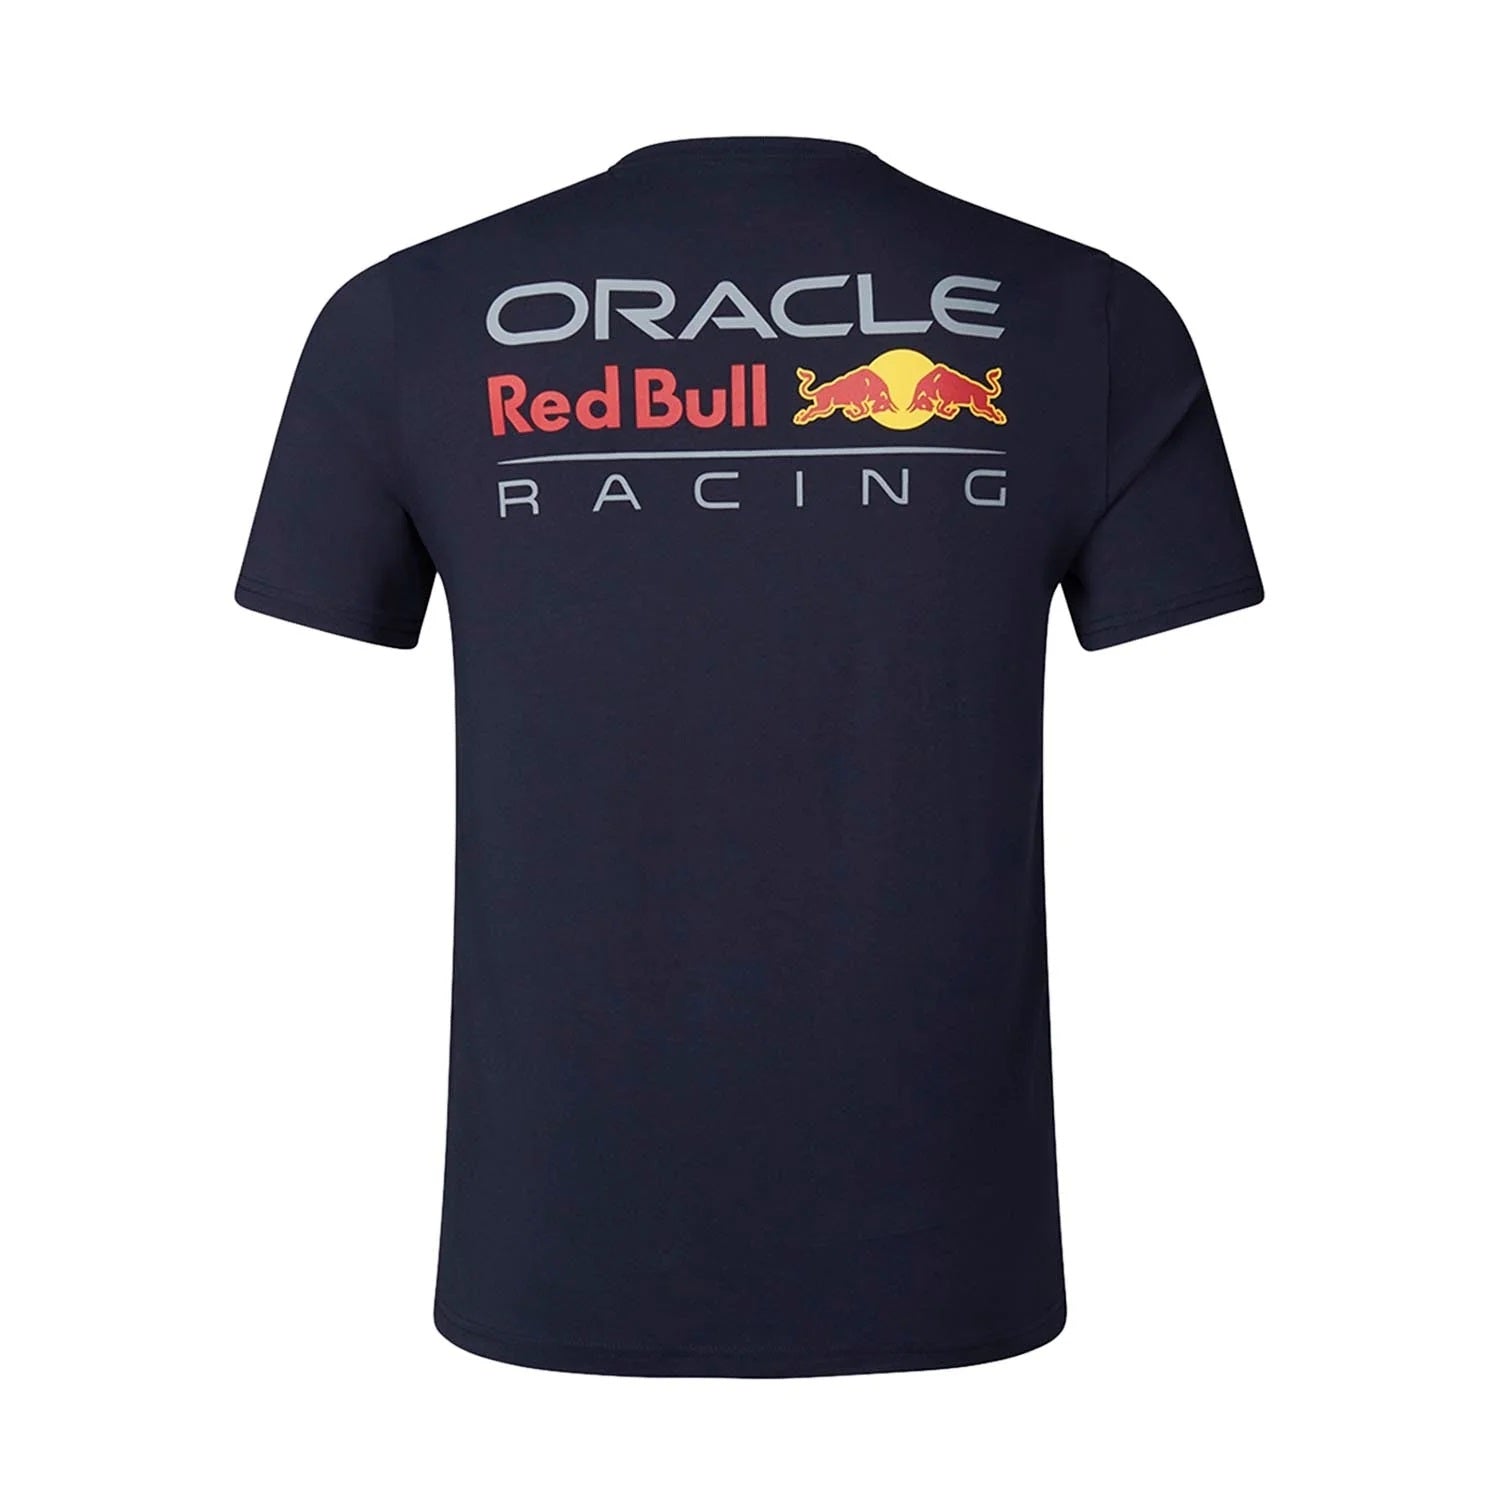 Castore Oracle T Shirt | Red Bull Racing Shirt | Formula 1 Driver T Shirts | F1 Clothing | Color Blue | Best Wearing in Bahrain | Halabh.com